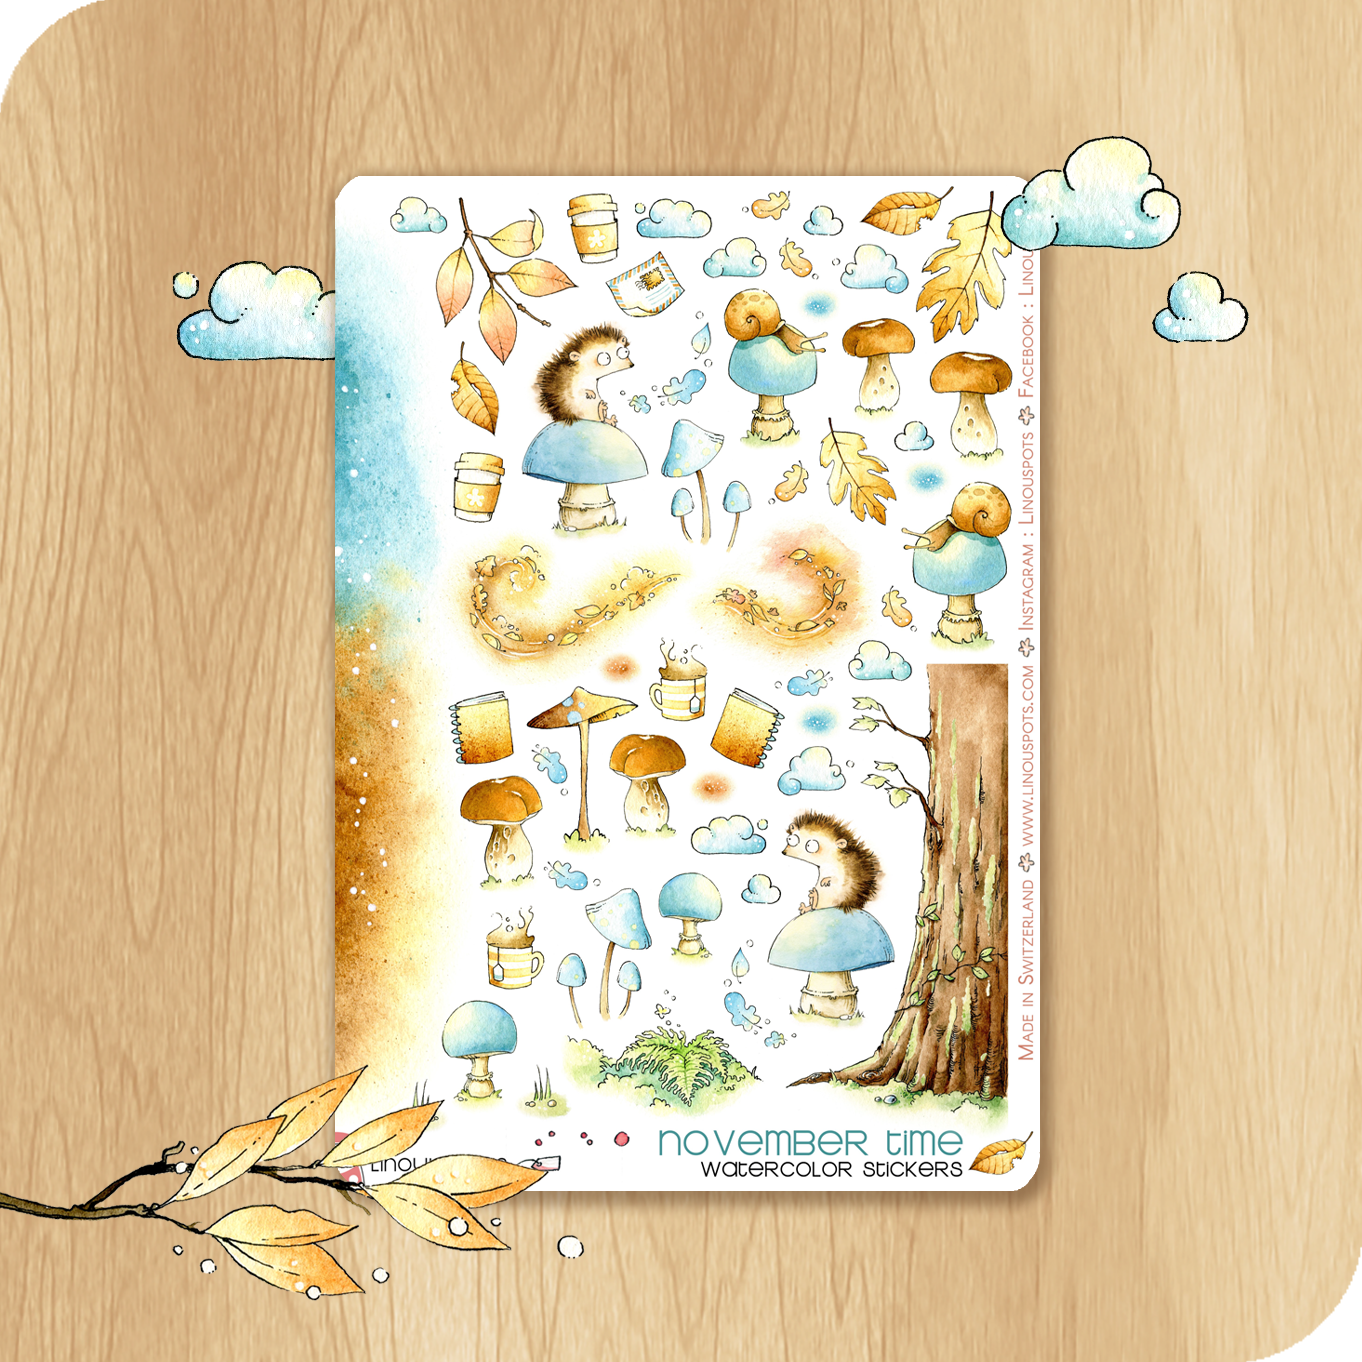 watercolor stickers in a fall mood with hedgehogs on mushrooms